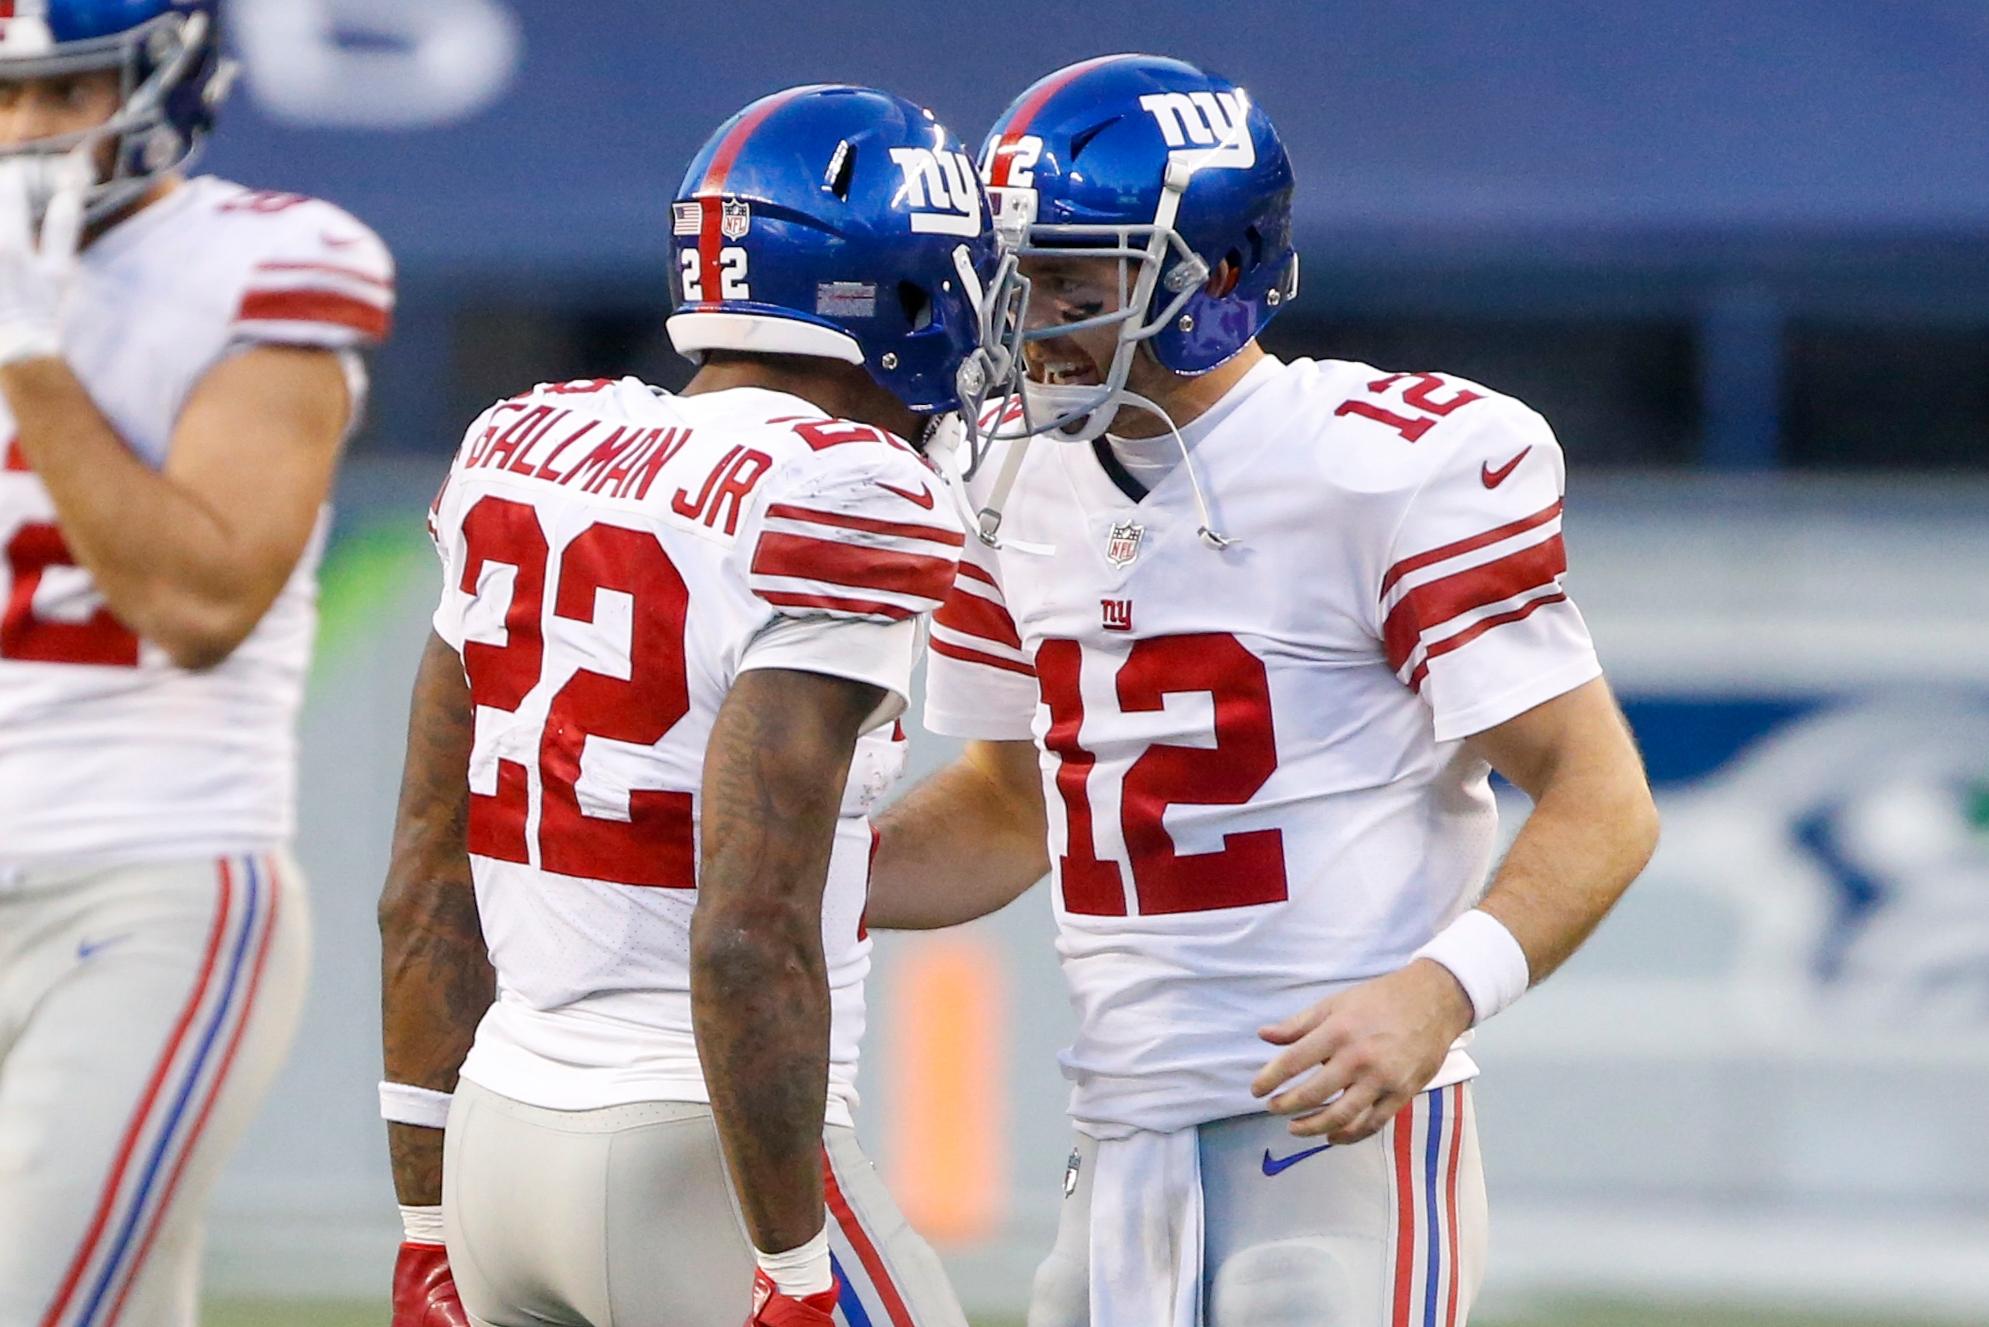 Dec 6, 2020; Seattle, Washington, USA; New York Giants quarterback Colt McCoy (12) celebrates with running back Wayne Gallman (22) before the final play of a 17-12 victory against the Seattle Seahawks at Lumen Field / © Joe Nicholson-USA TODAY Sports